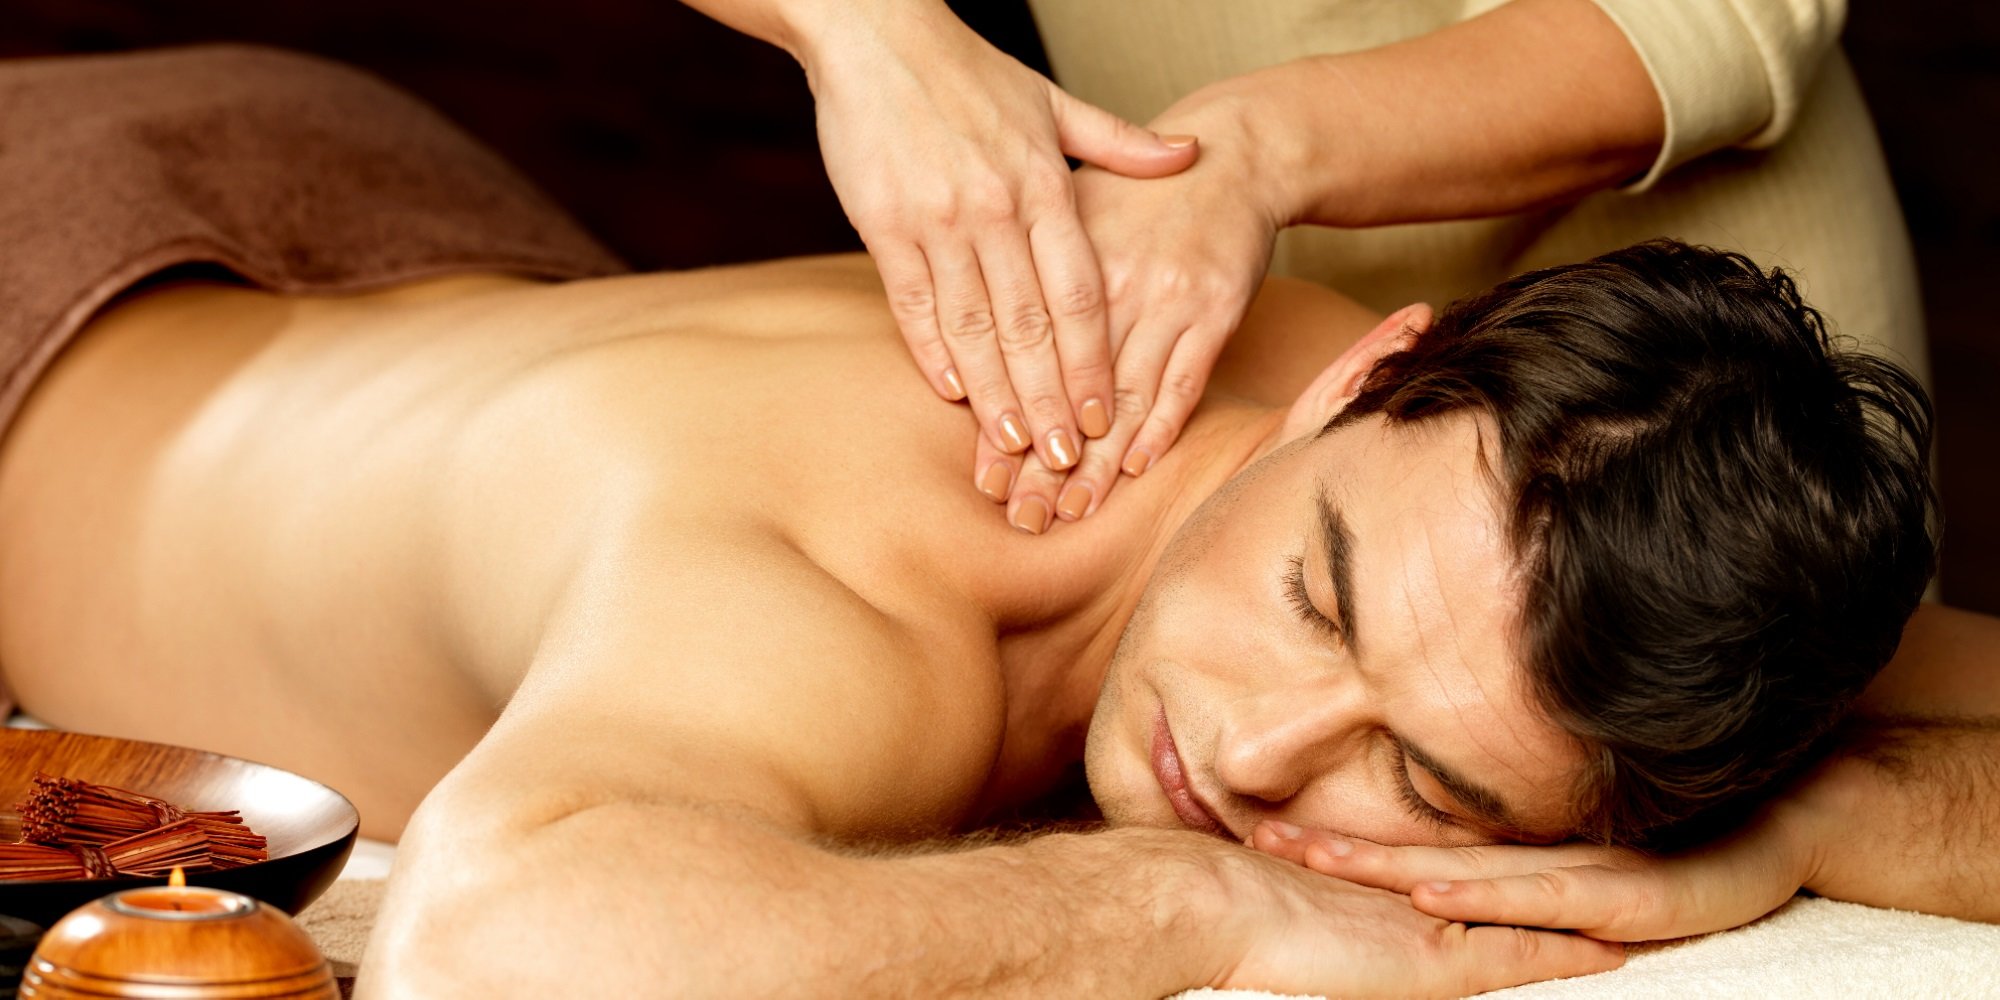 Massage and manscaping